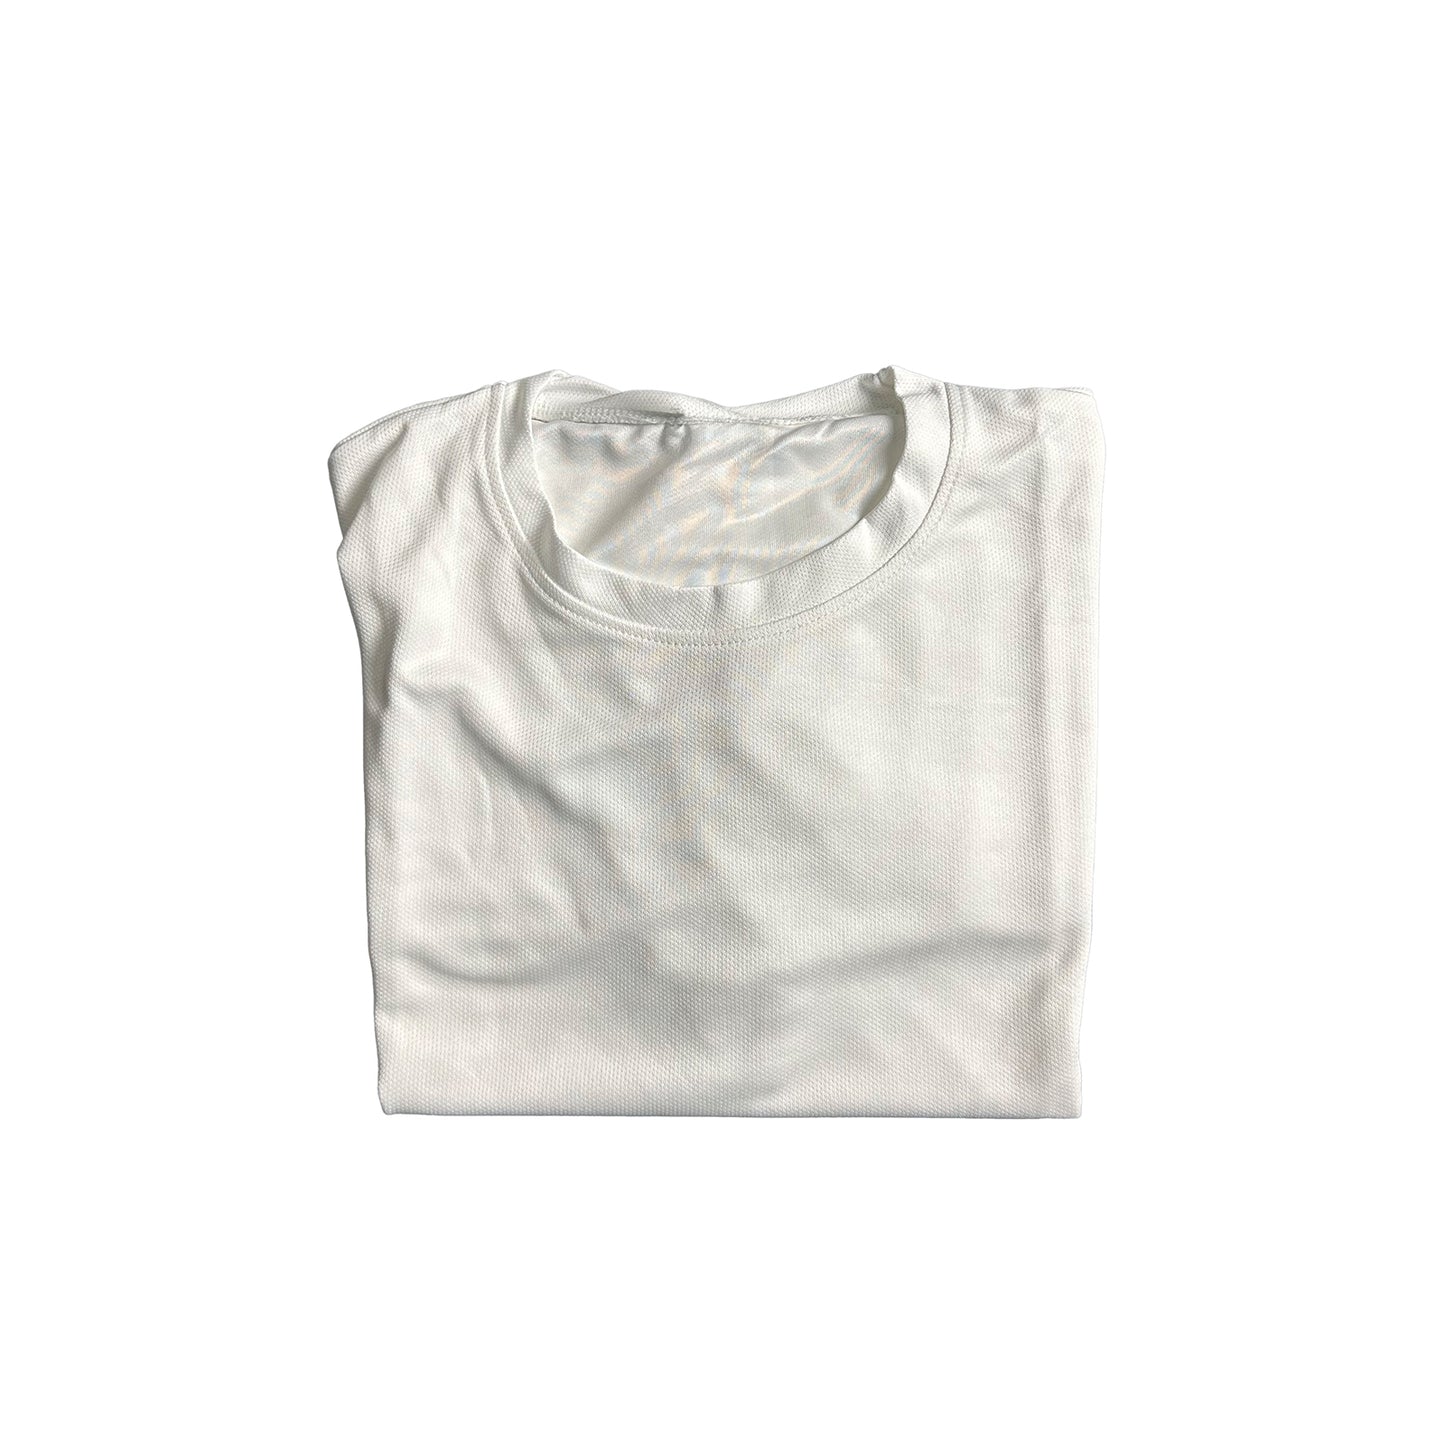 Bulk Deal: Lot of 50 Sublimation-Ready Ultra White T-Shirts - Perfect for Customization and Resale